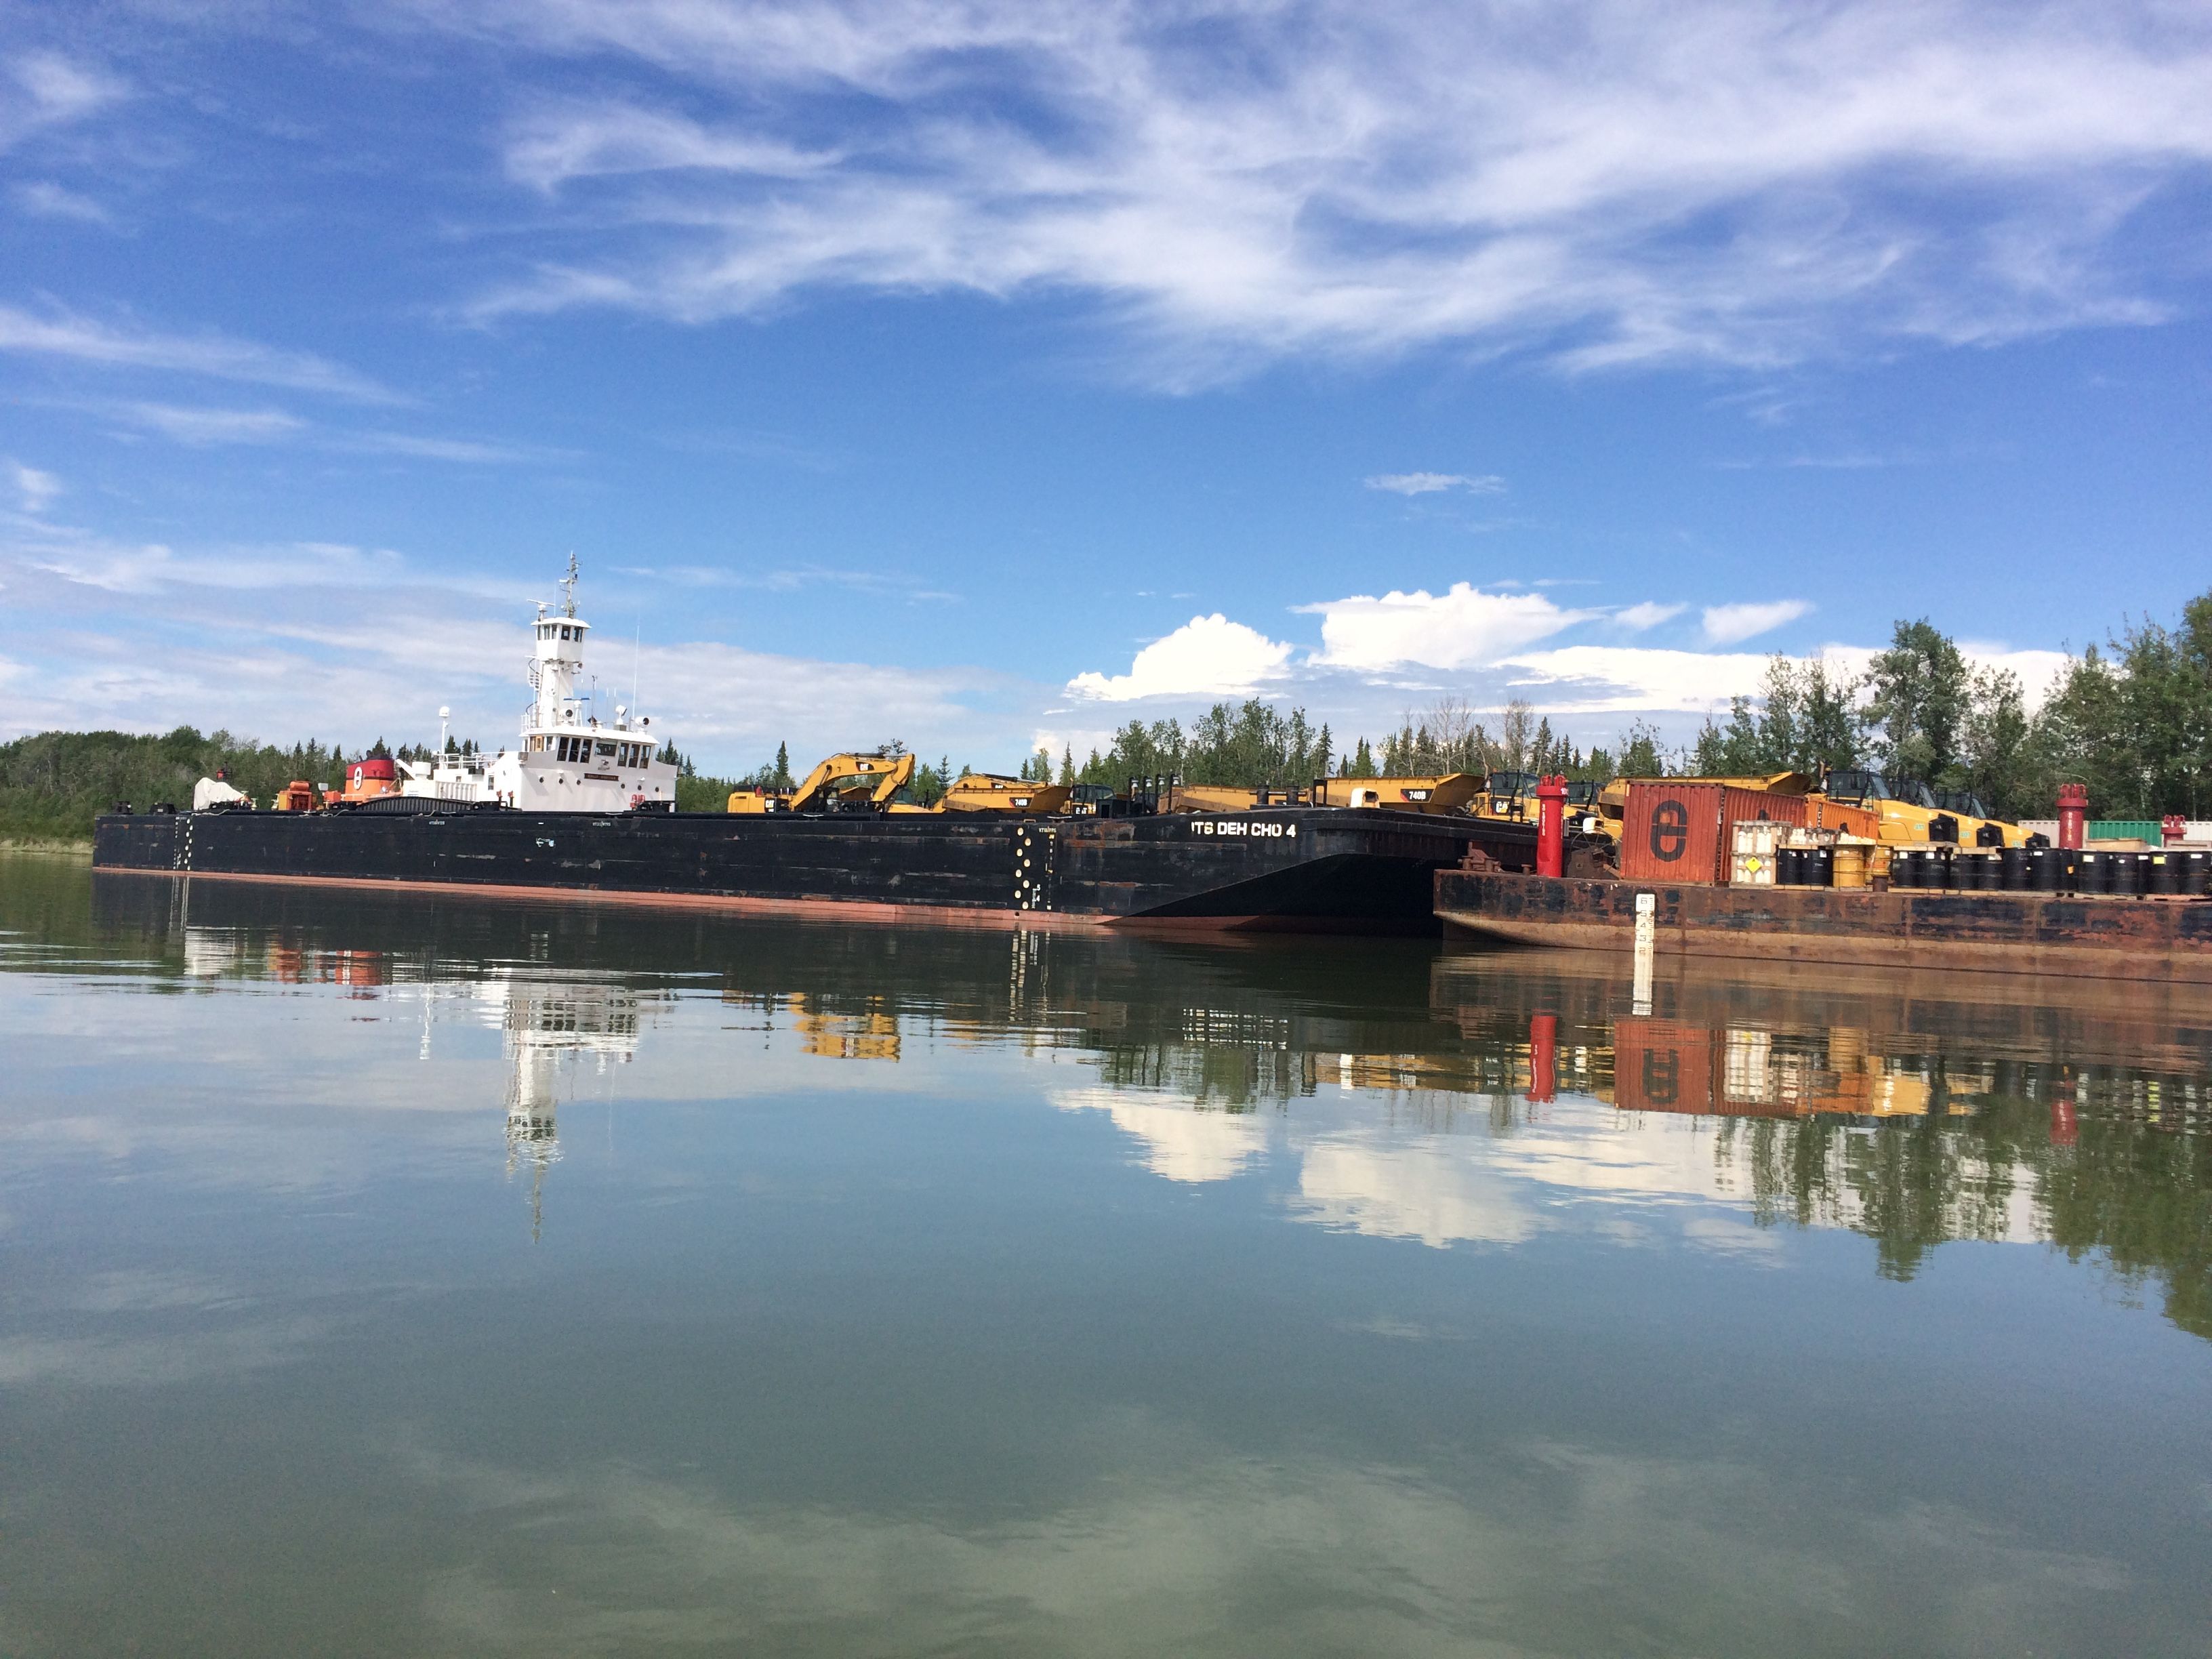 An NTCL barge and tug on the Mackenzie River. Image by Brian Castner. Canada's Northwest Territories, 2016.